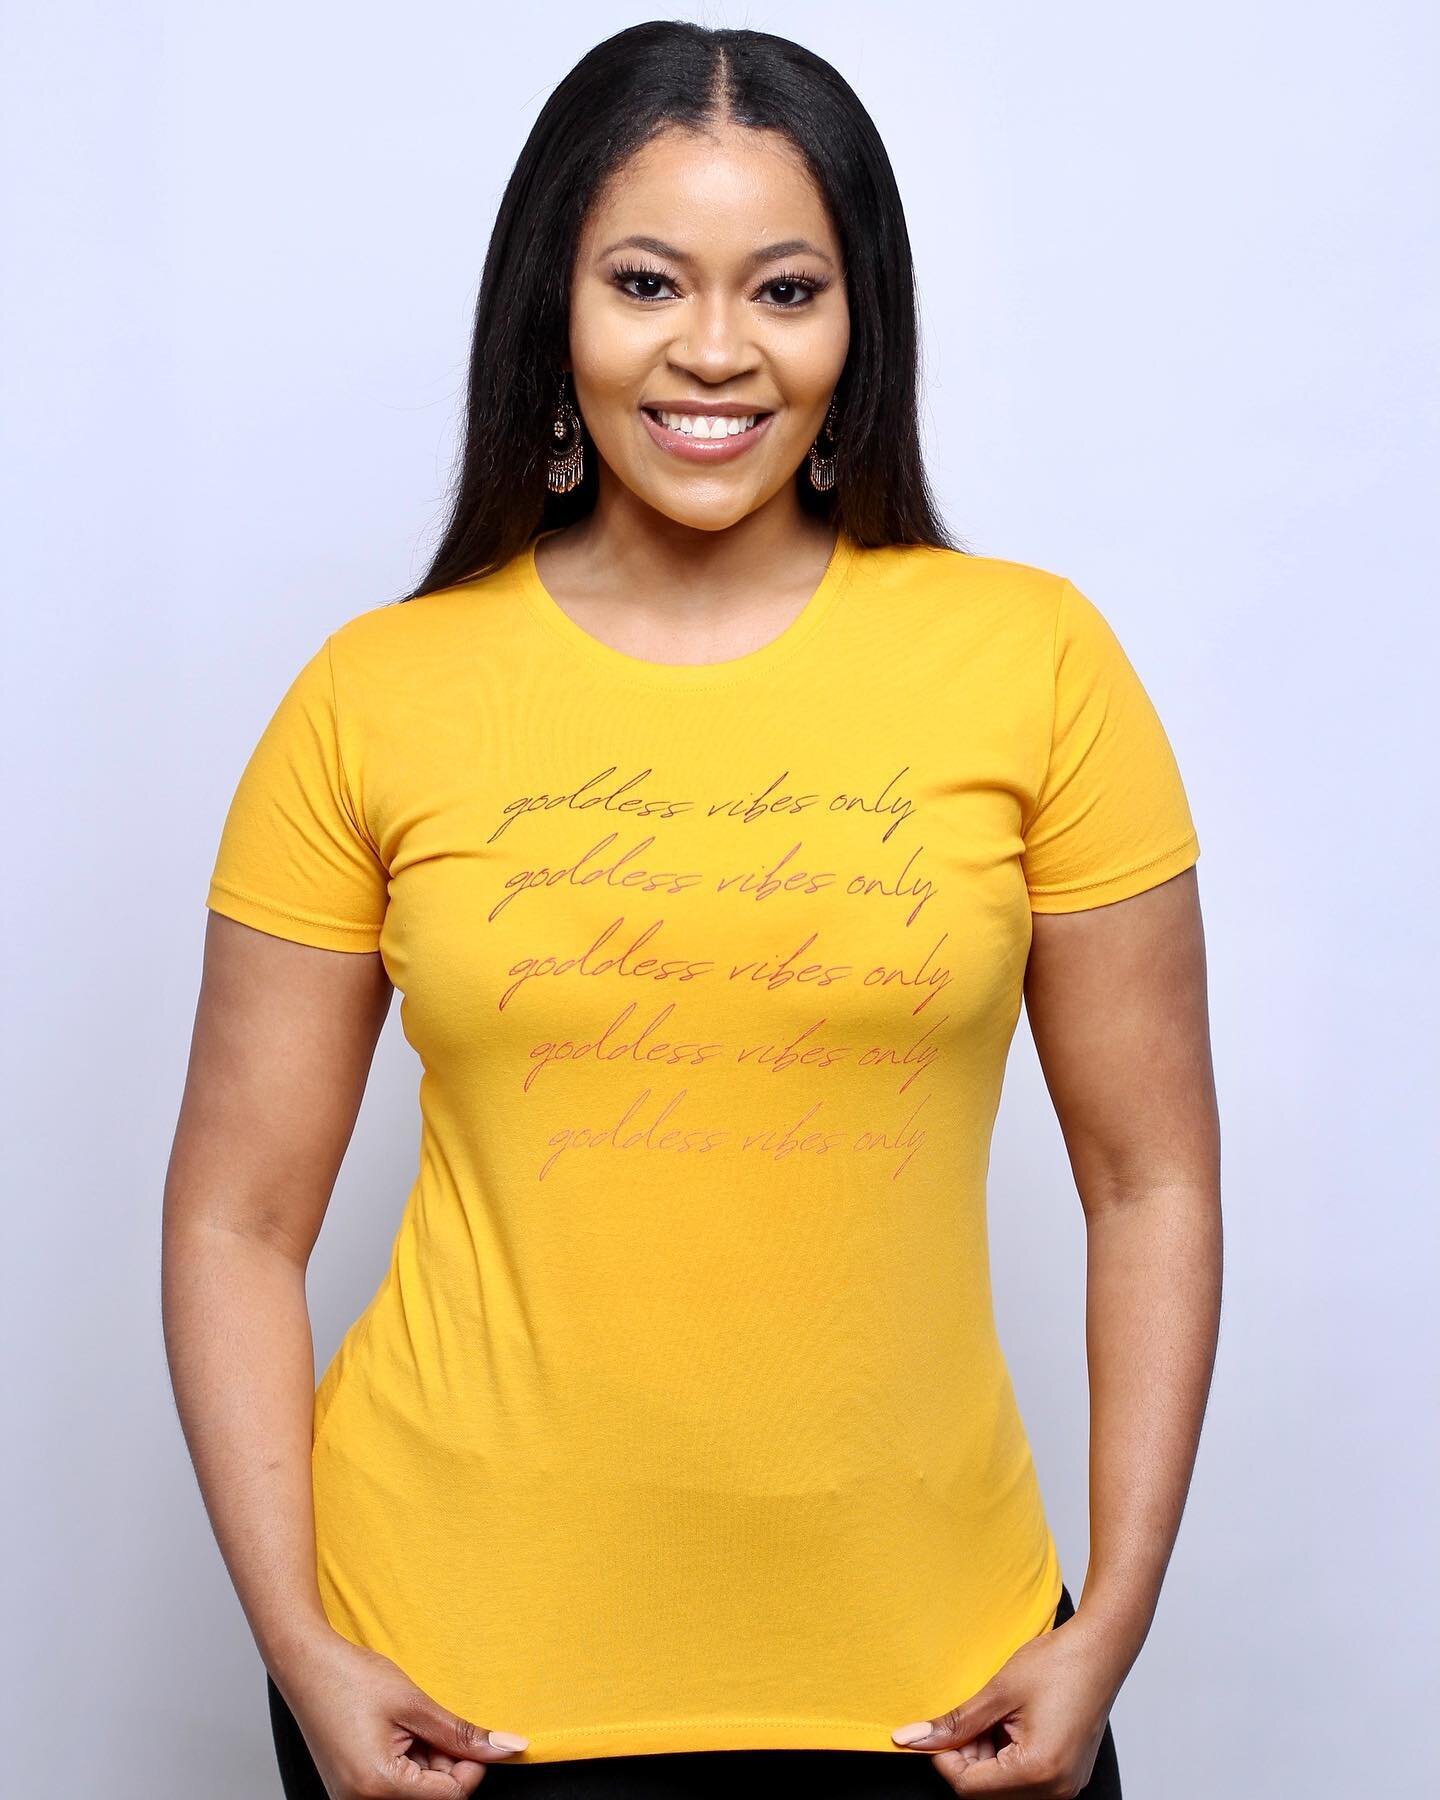 &ldquo;Goddess Vibes Tee&rdquo; available in Yellow and Black (swipe to see black) dropping TOMORROW 3.19.21 exclusively on Goddess Essentials ✨@goddessessentials.love

#MerchMadness #GoddessEssentials #Shop #ItsALifestyle #blackownedbusiness #womano